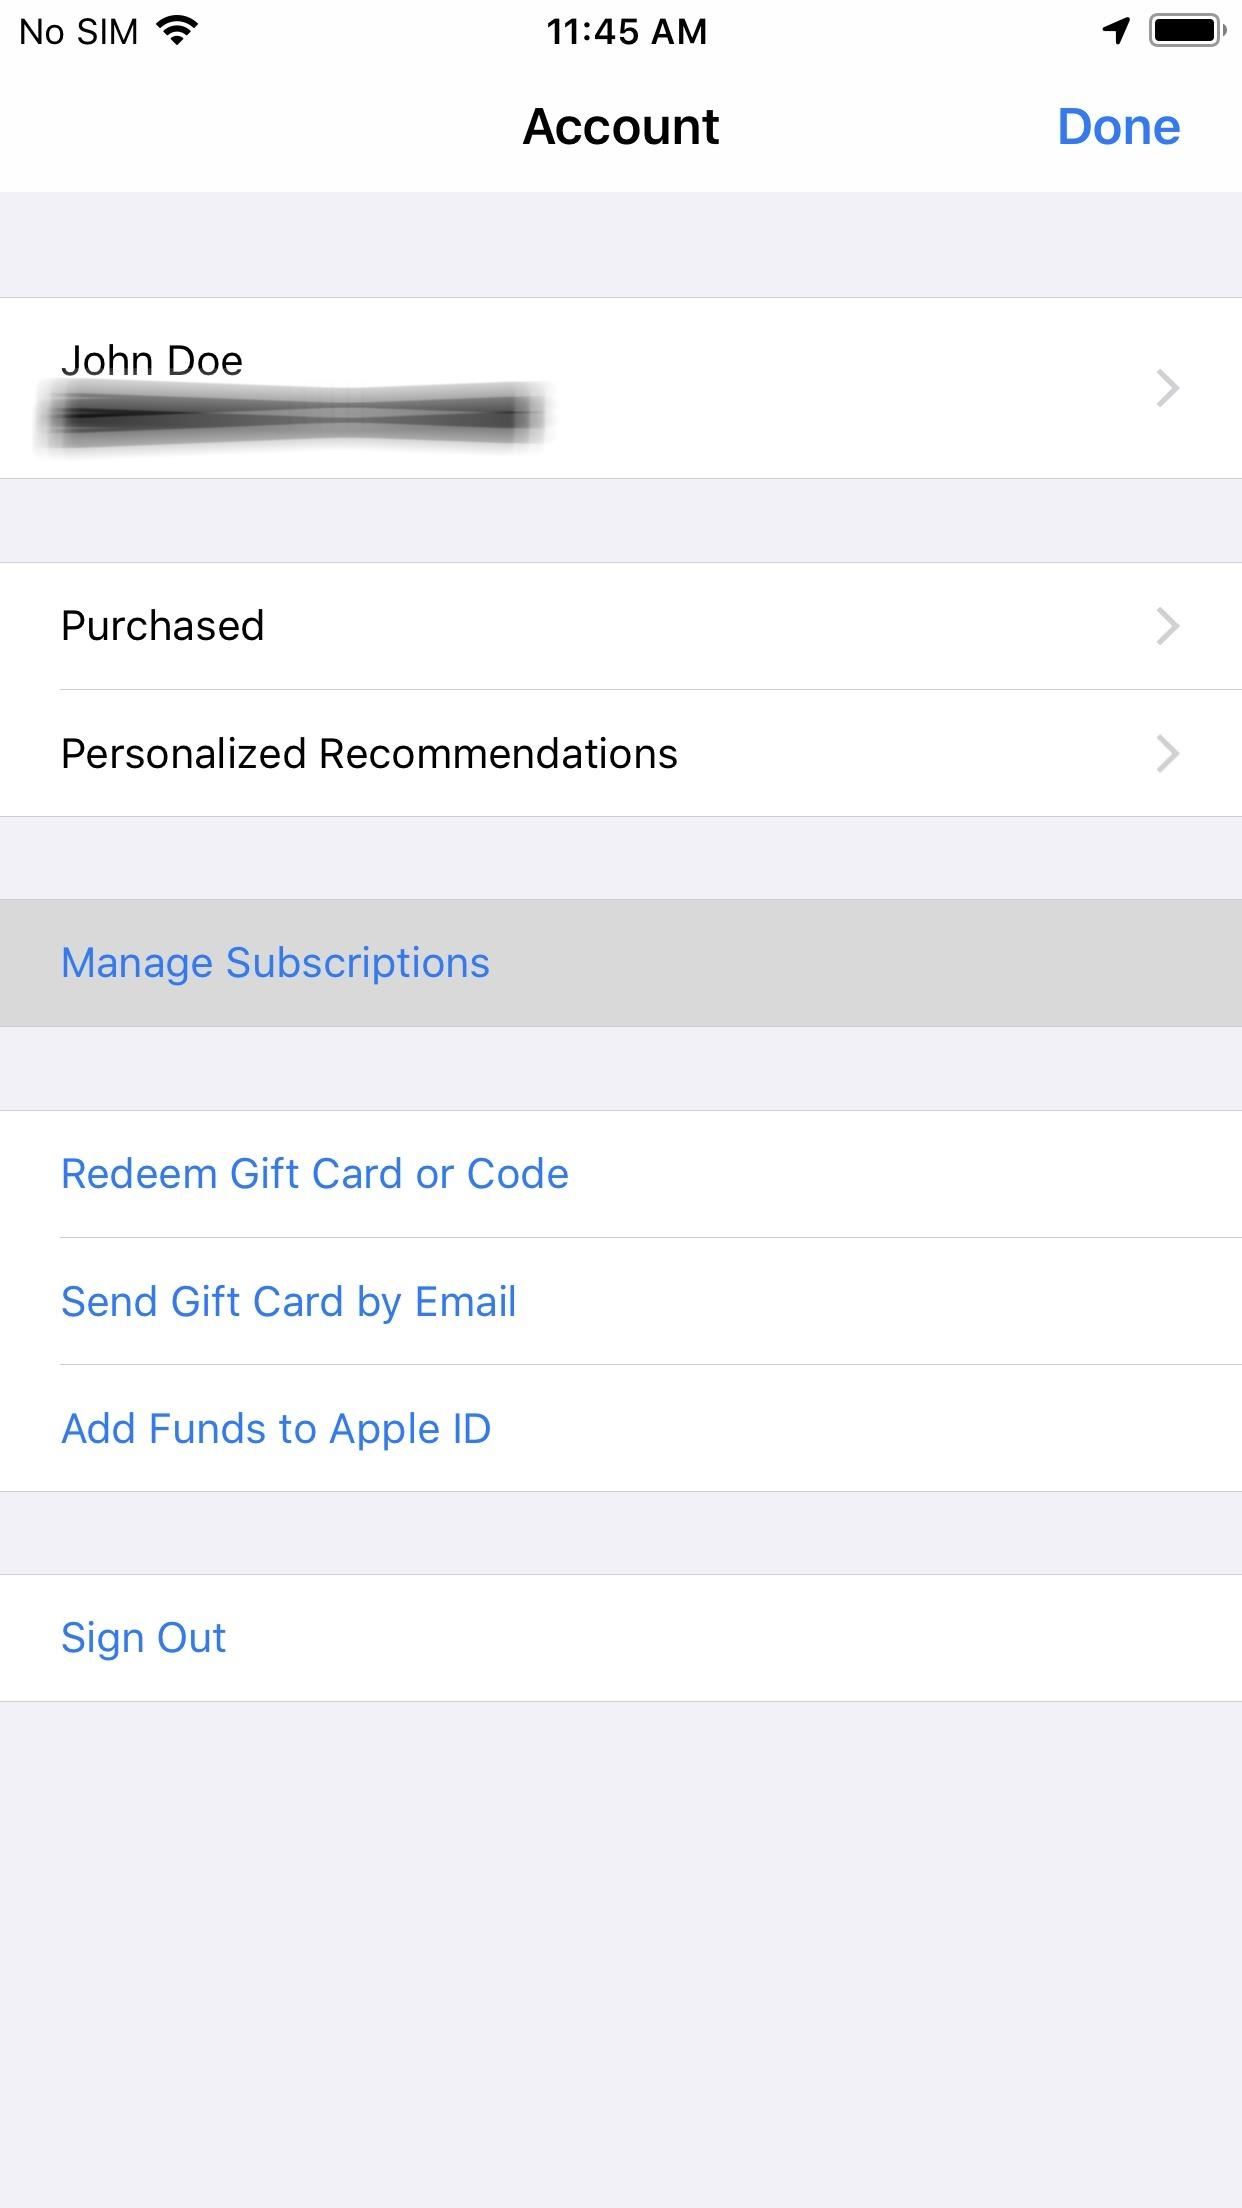 How to Disable Apple Music's Auto-Renewal for Free Trials So You Don't Get Charged